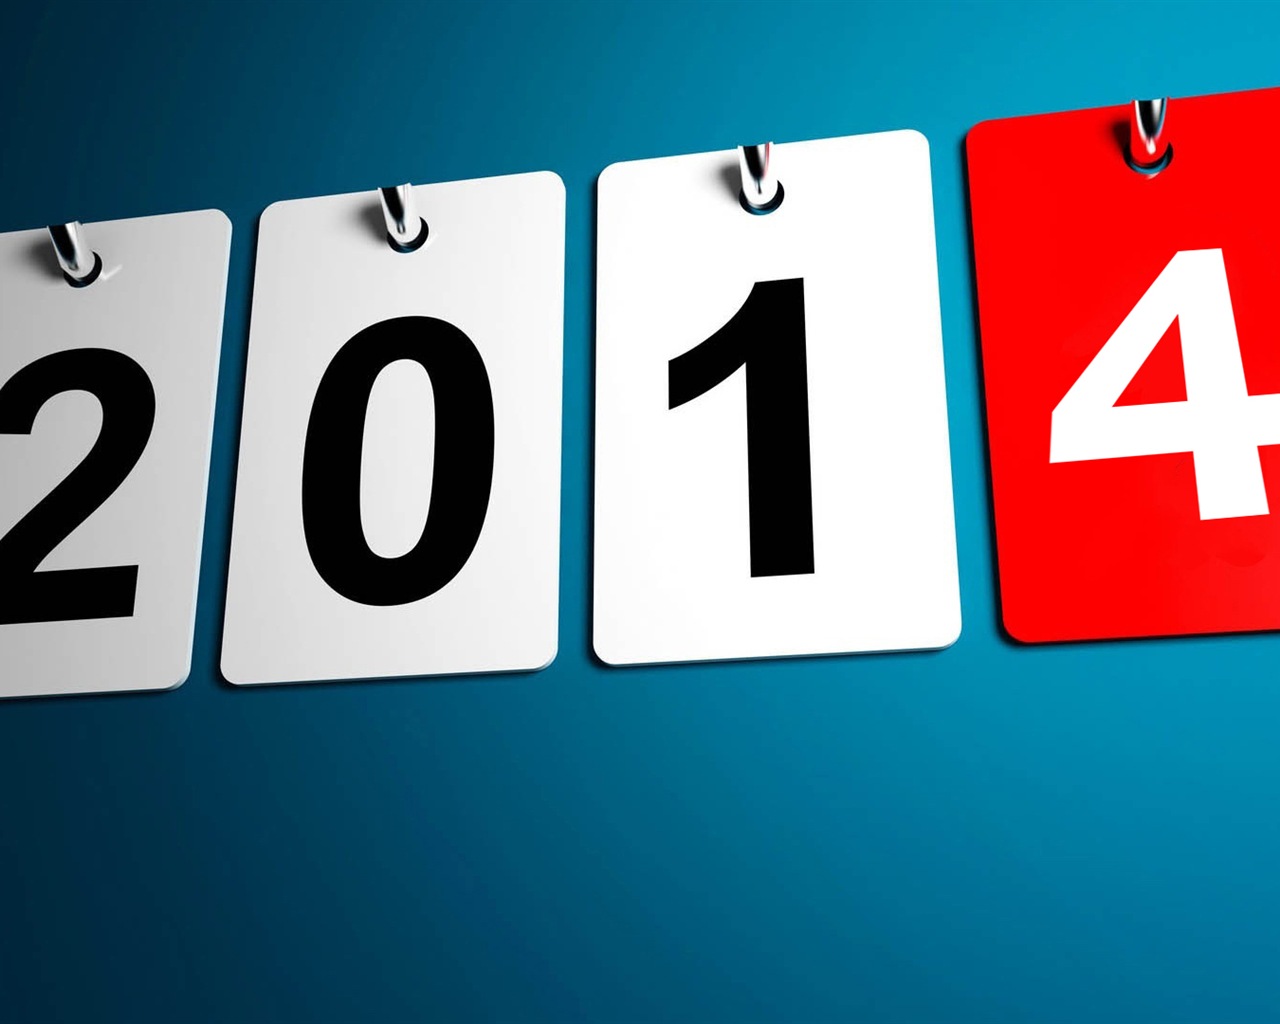 2014 New Year Theme HD Wallpapers (1) #18 - 1280x1024